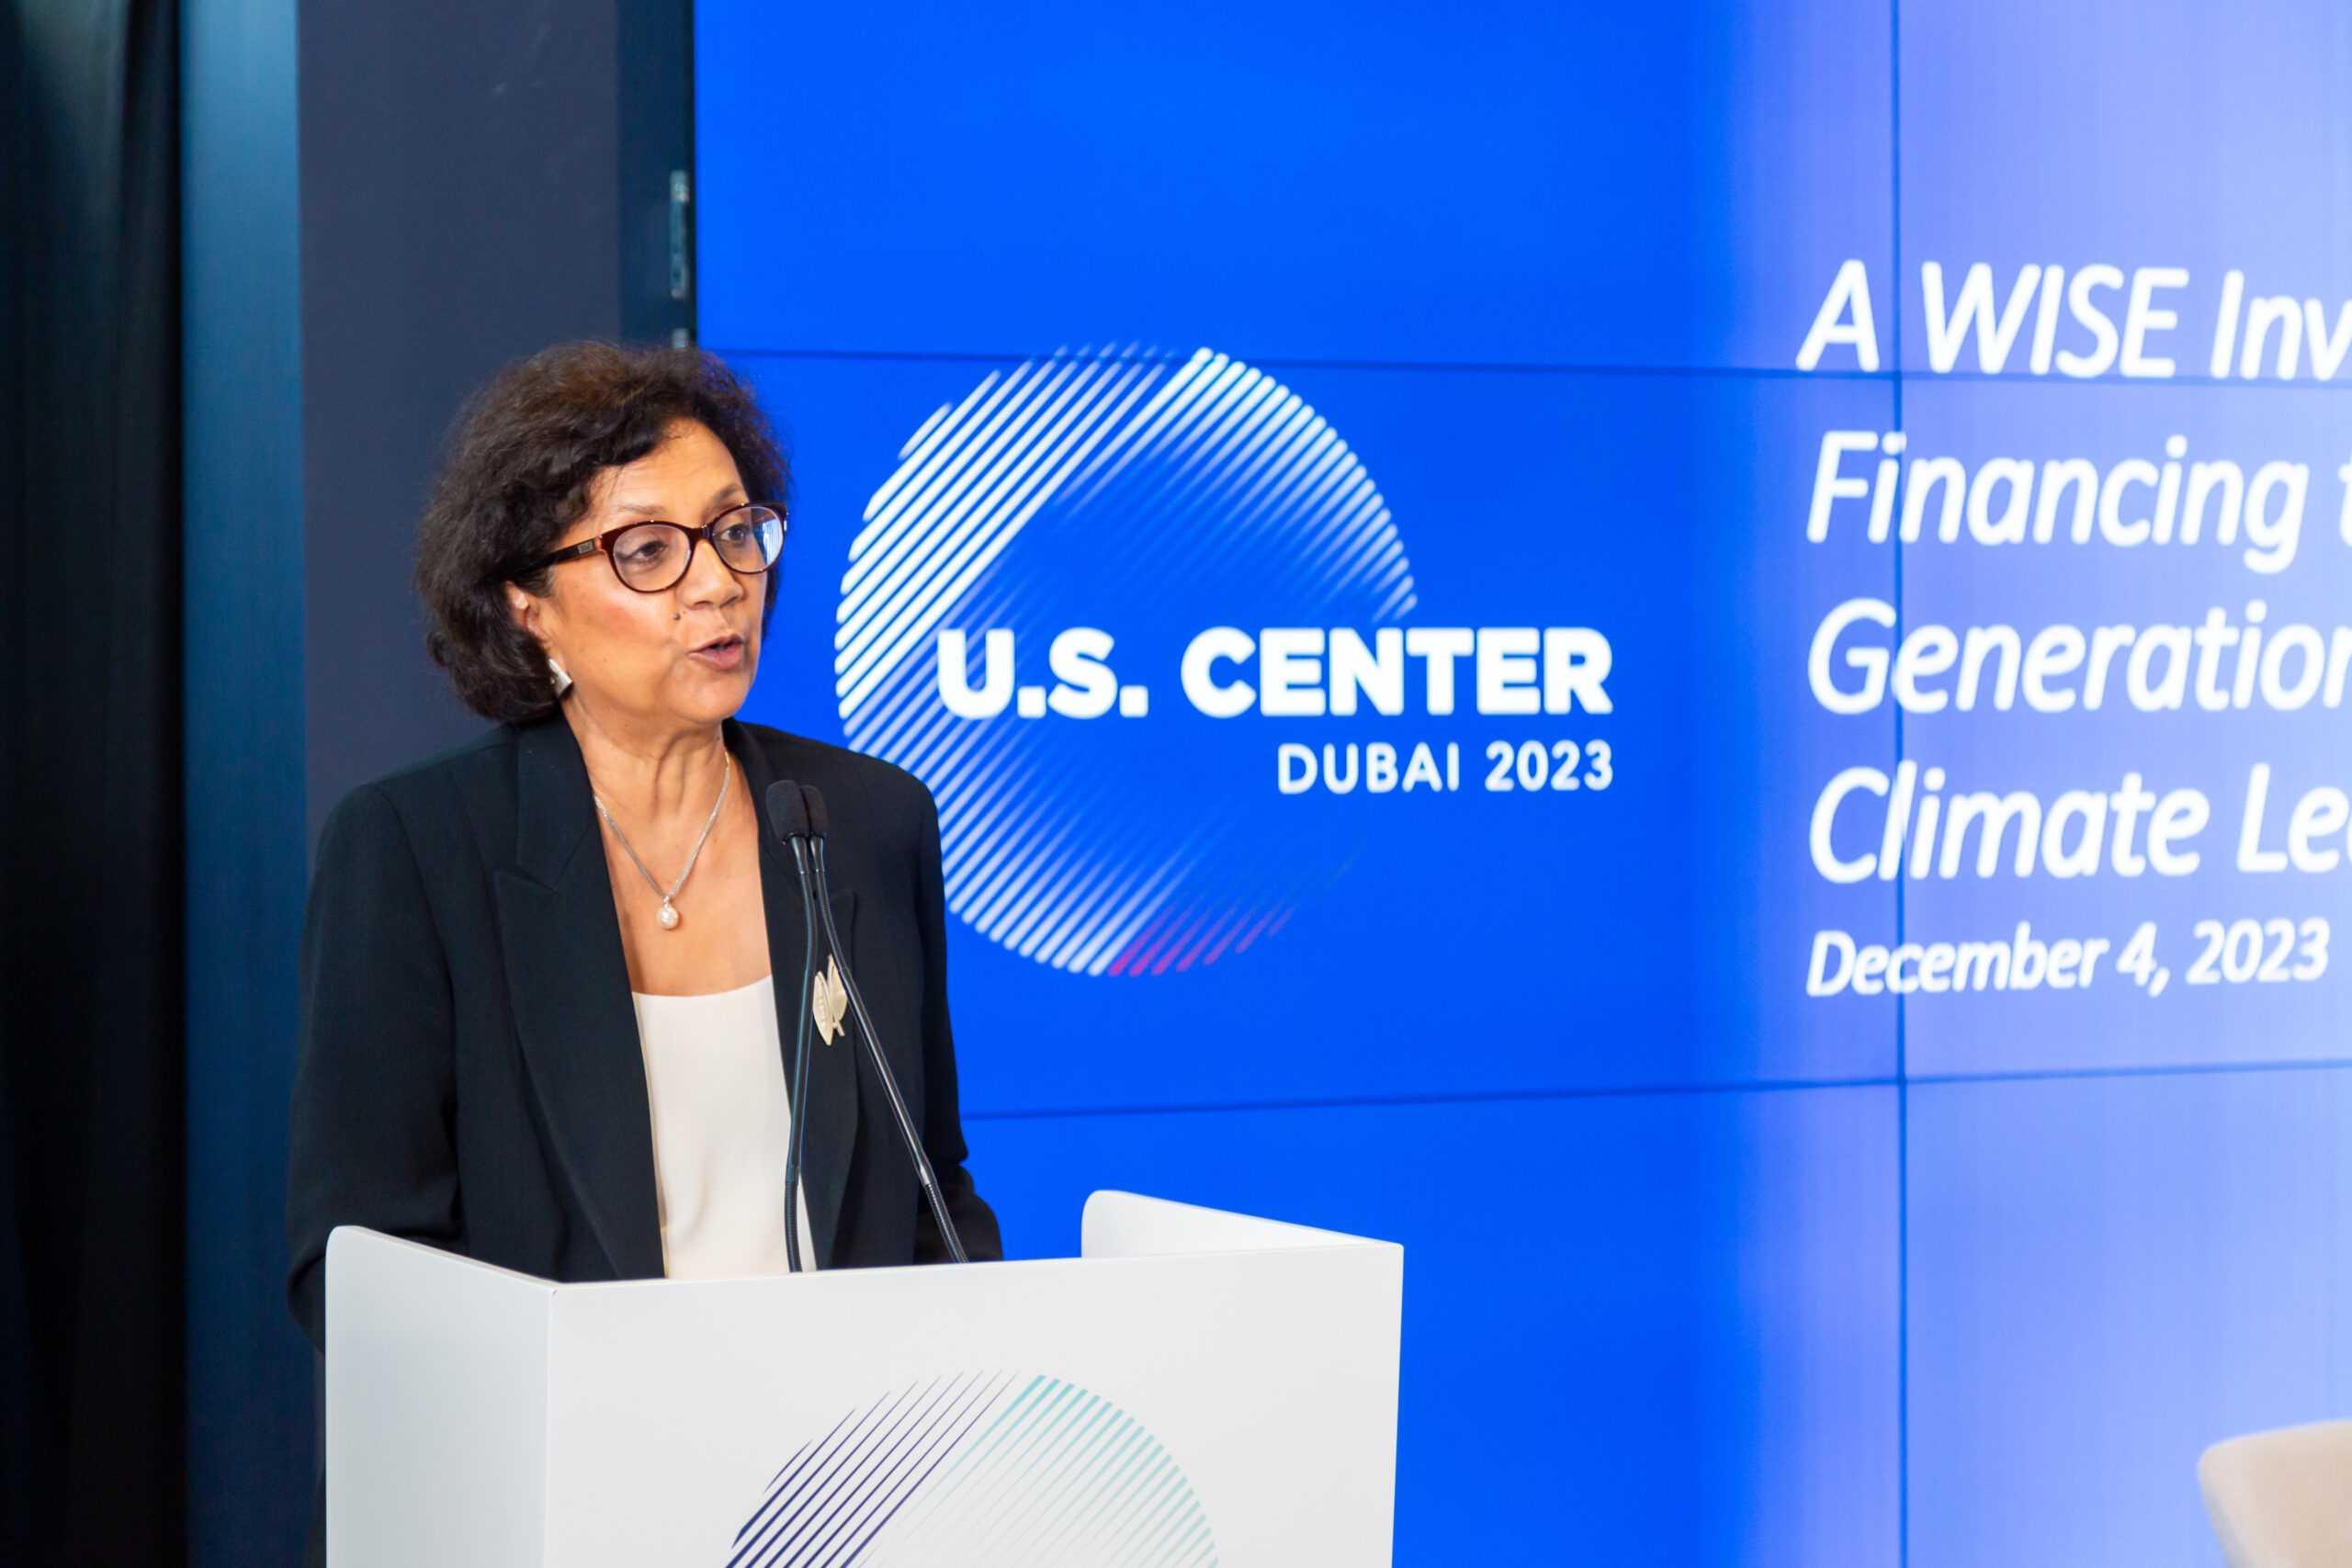 We-Fi Receives a $10 Million Boost from the United States at COP28 to Empower Women Entrepreneurs Tackling Climate Challenges